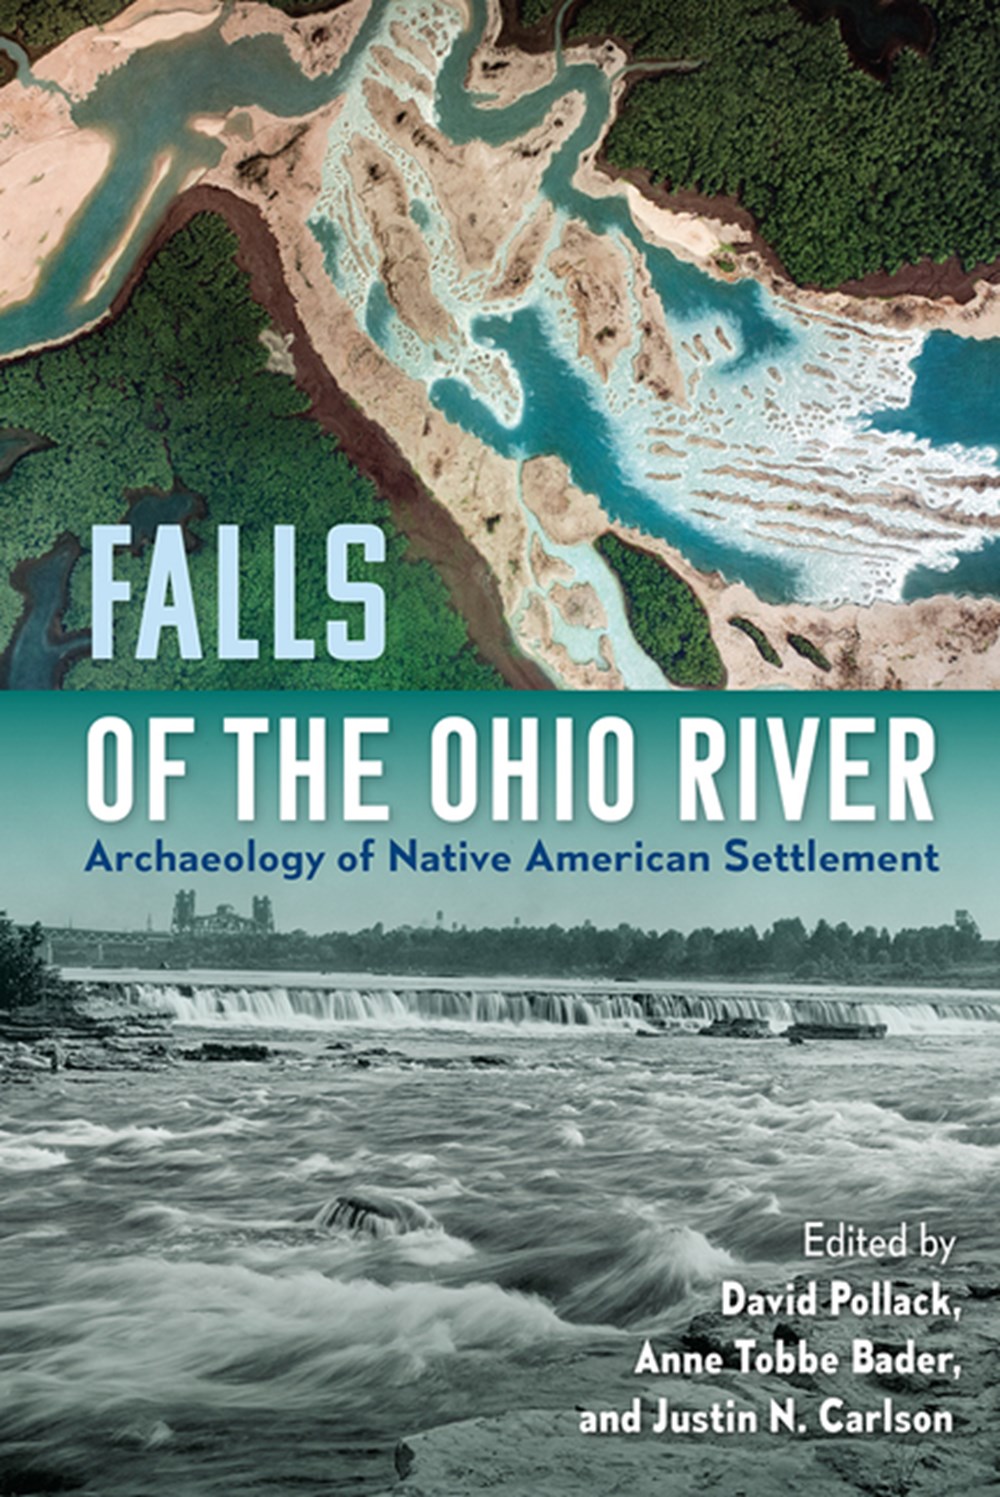 Falls of the Ohio River: Archaeology of Native American Settlement